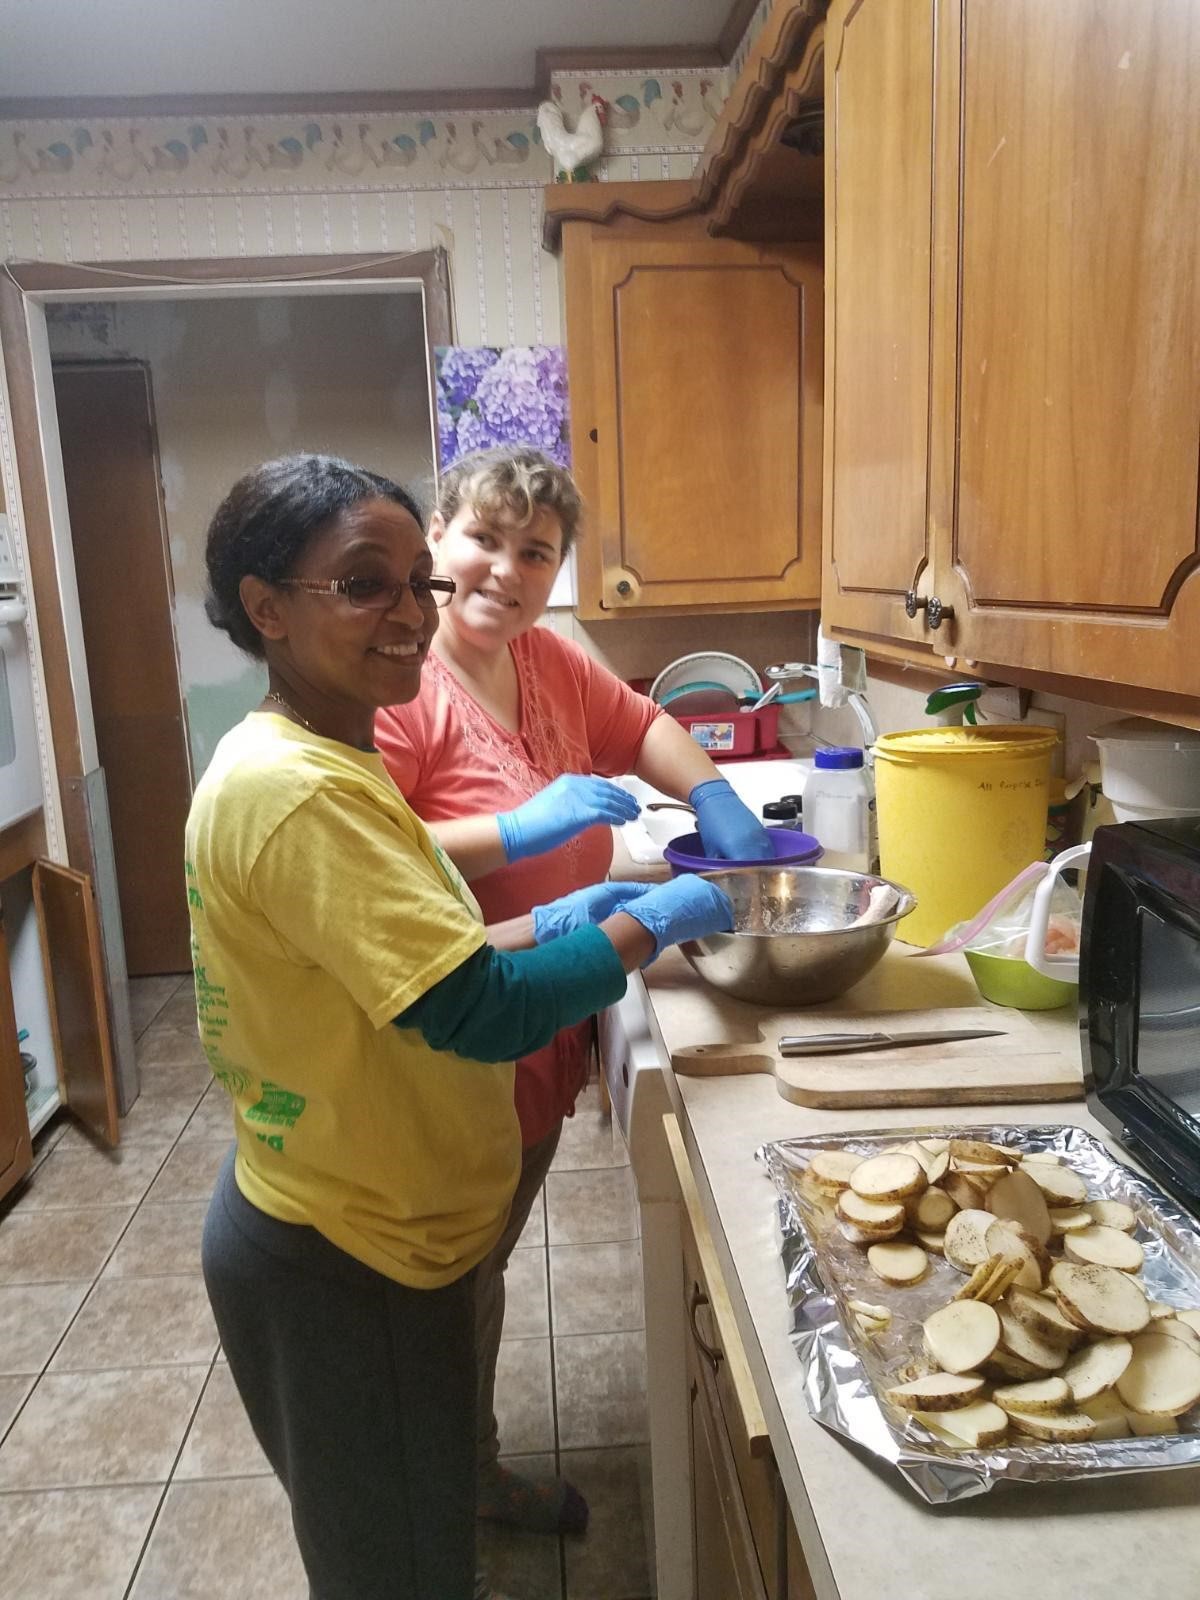 A New Leaf staff assists residential clients with food preparation, cleaning, personal finance, and more! 